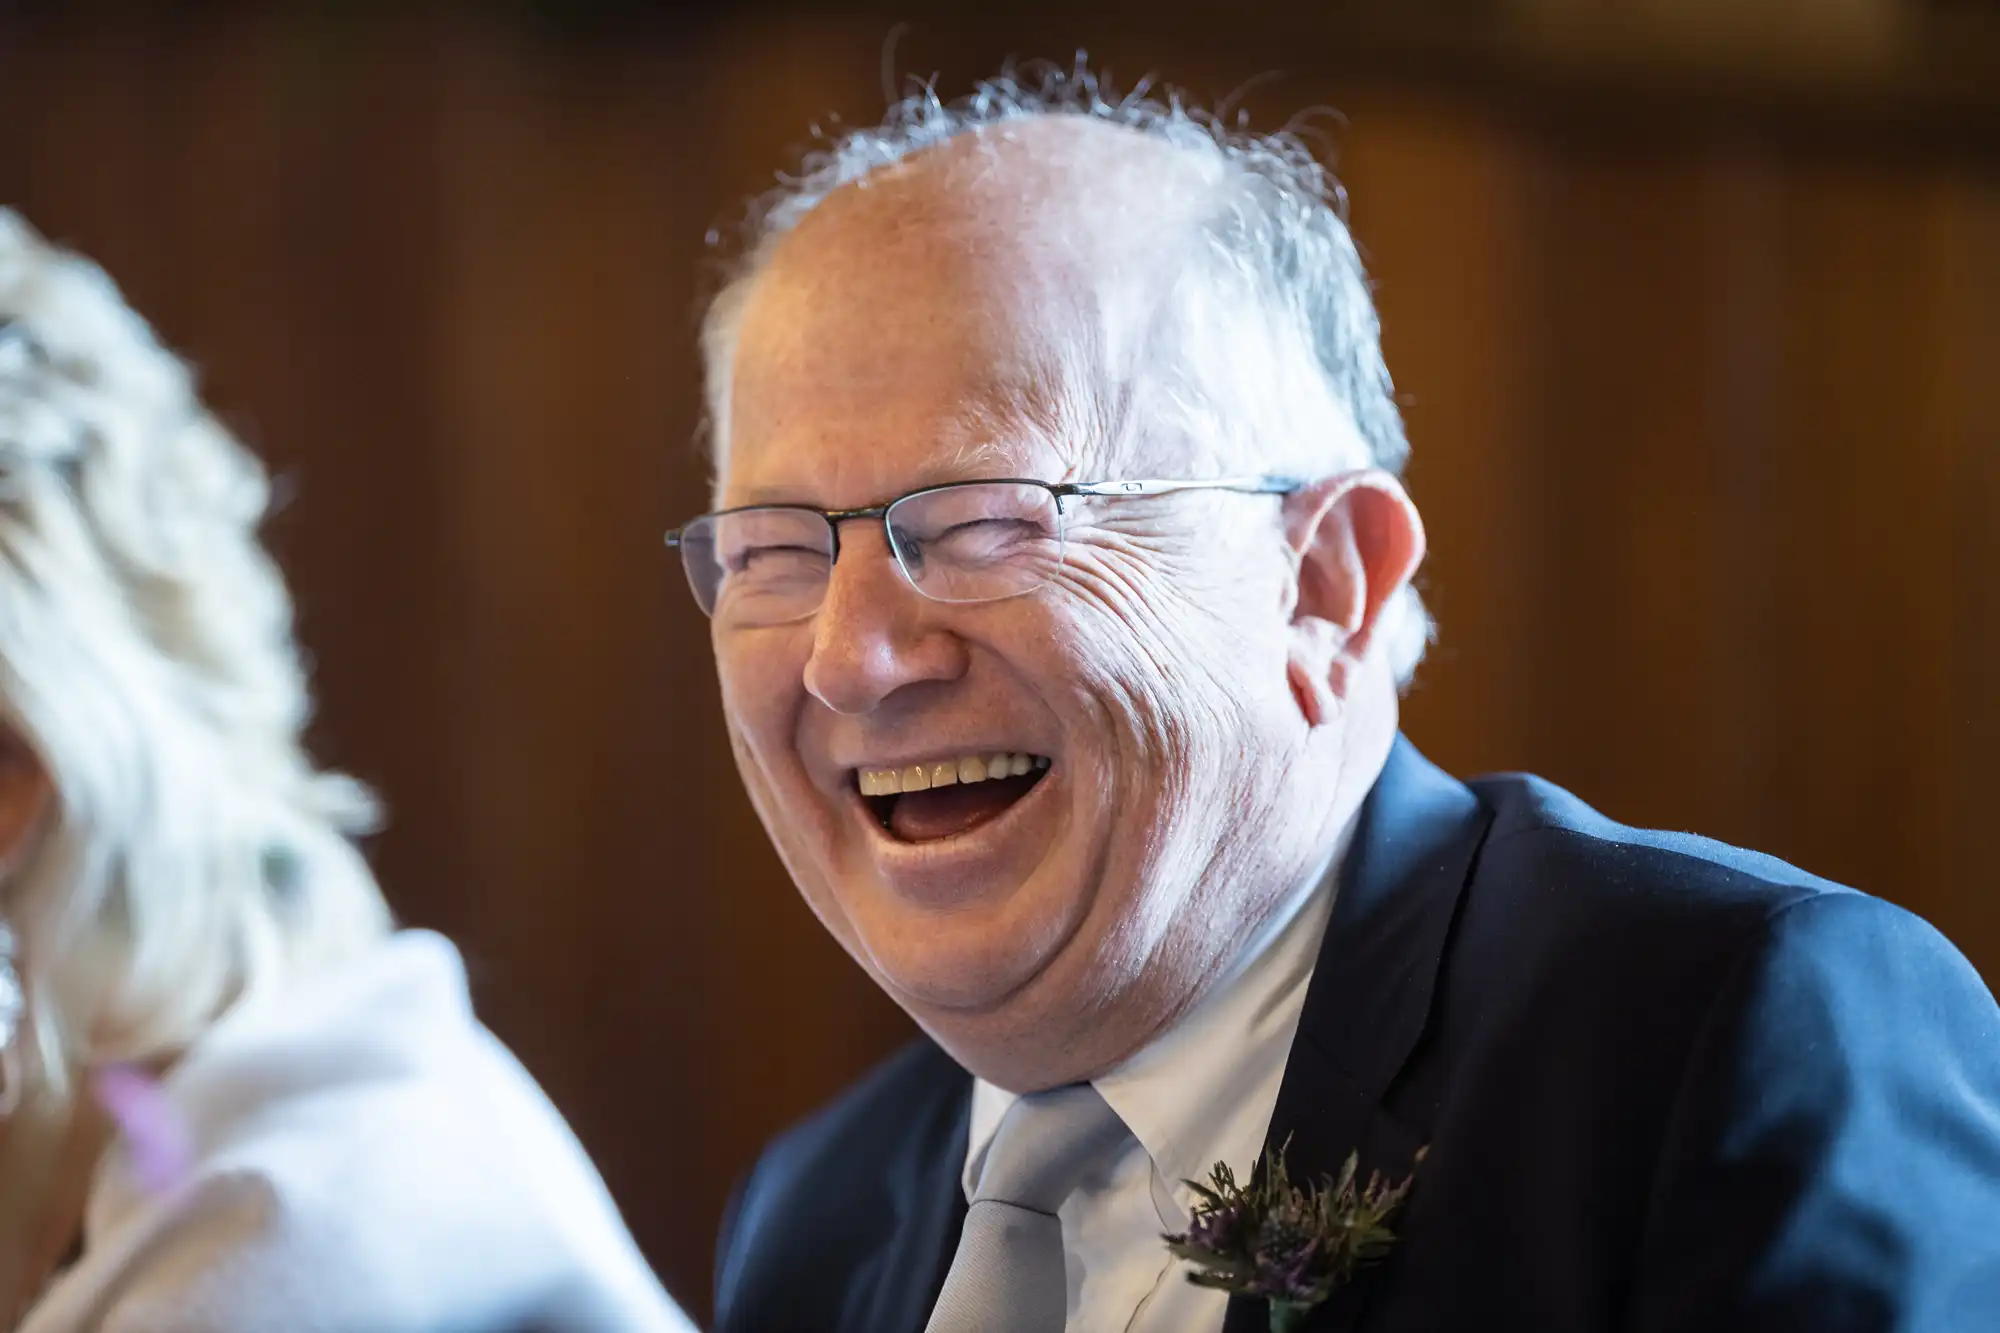 A man in a suit laughing heartily at a wedding reception.